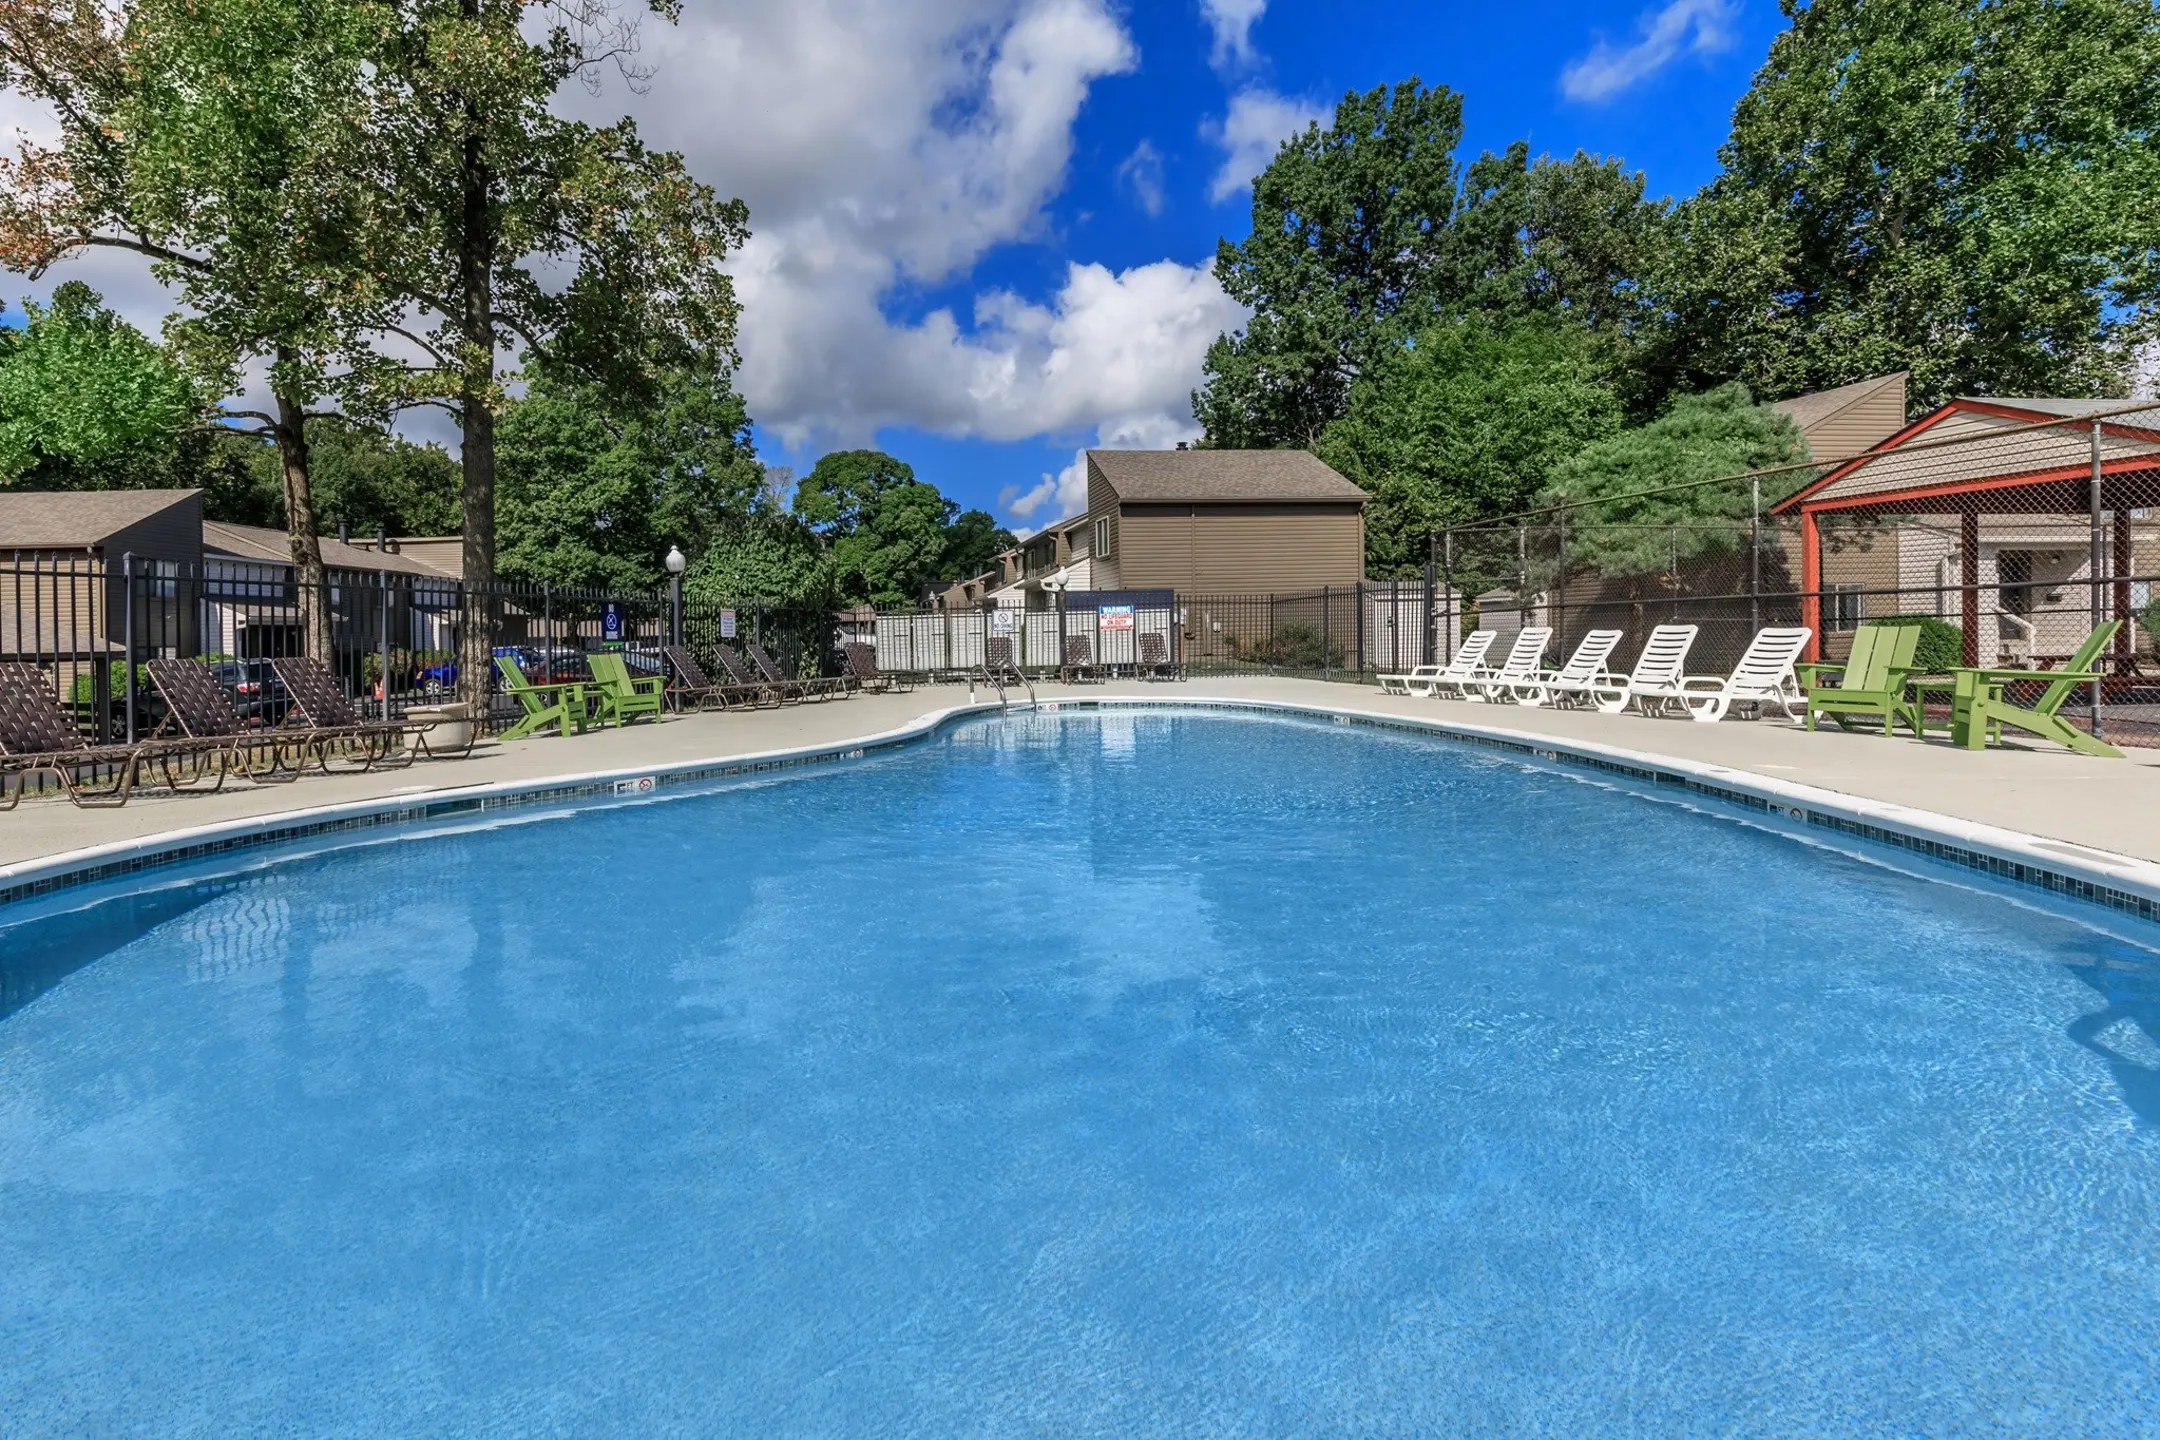 Pool - The Preserve at Allisonville - Indianapolis, IN